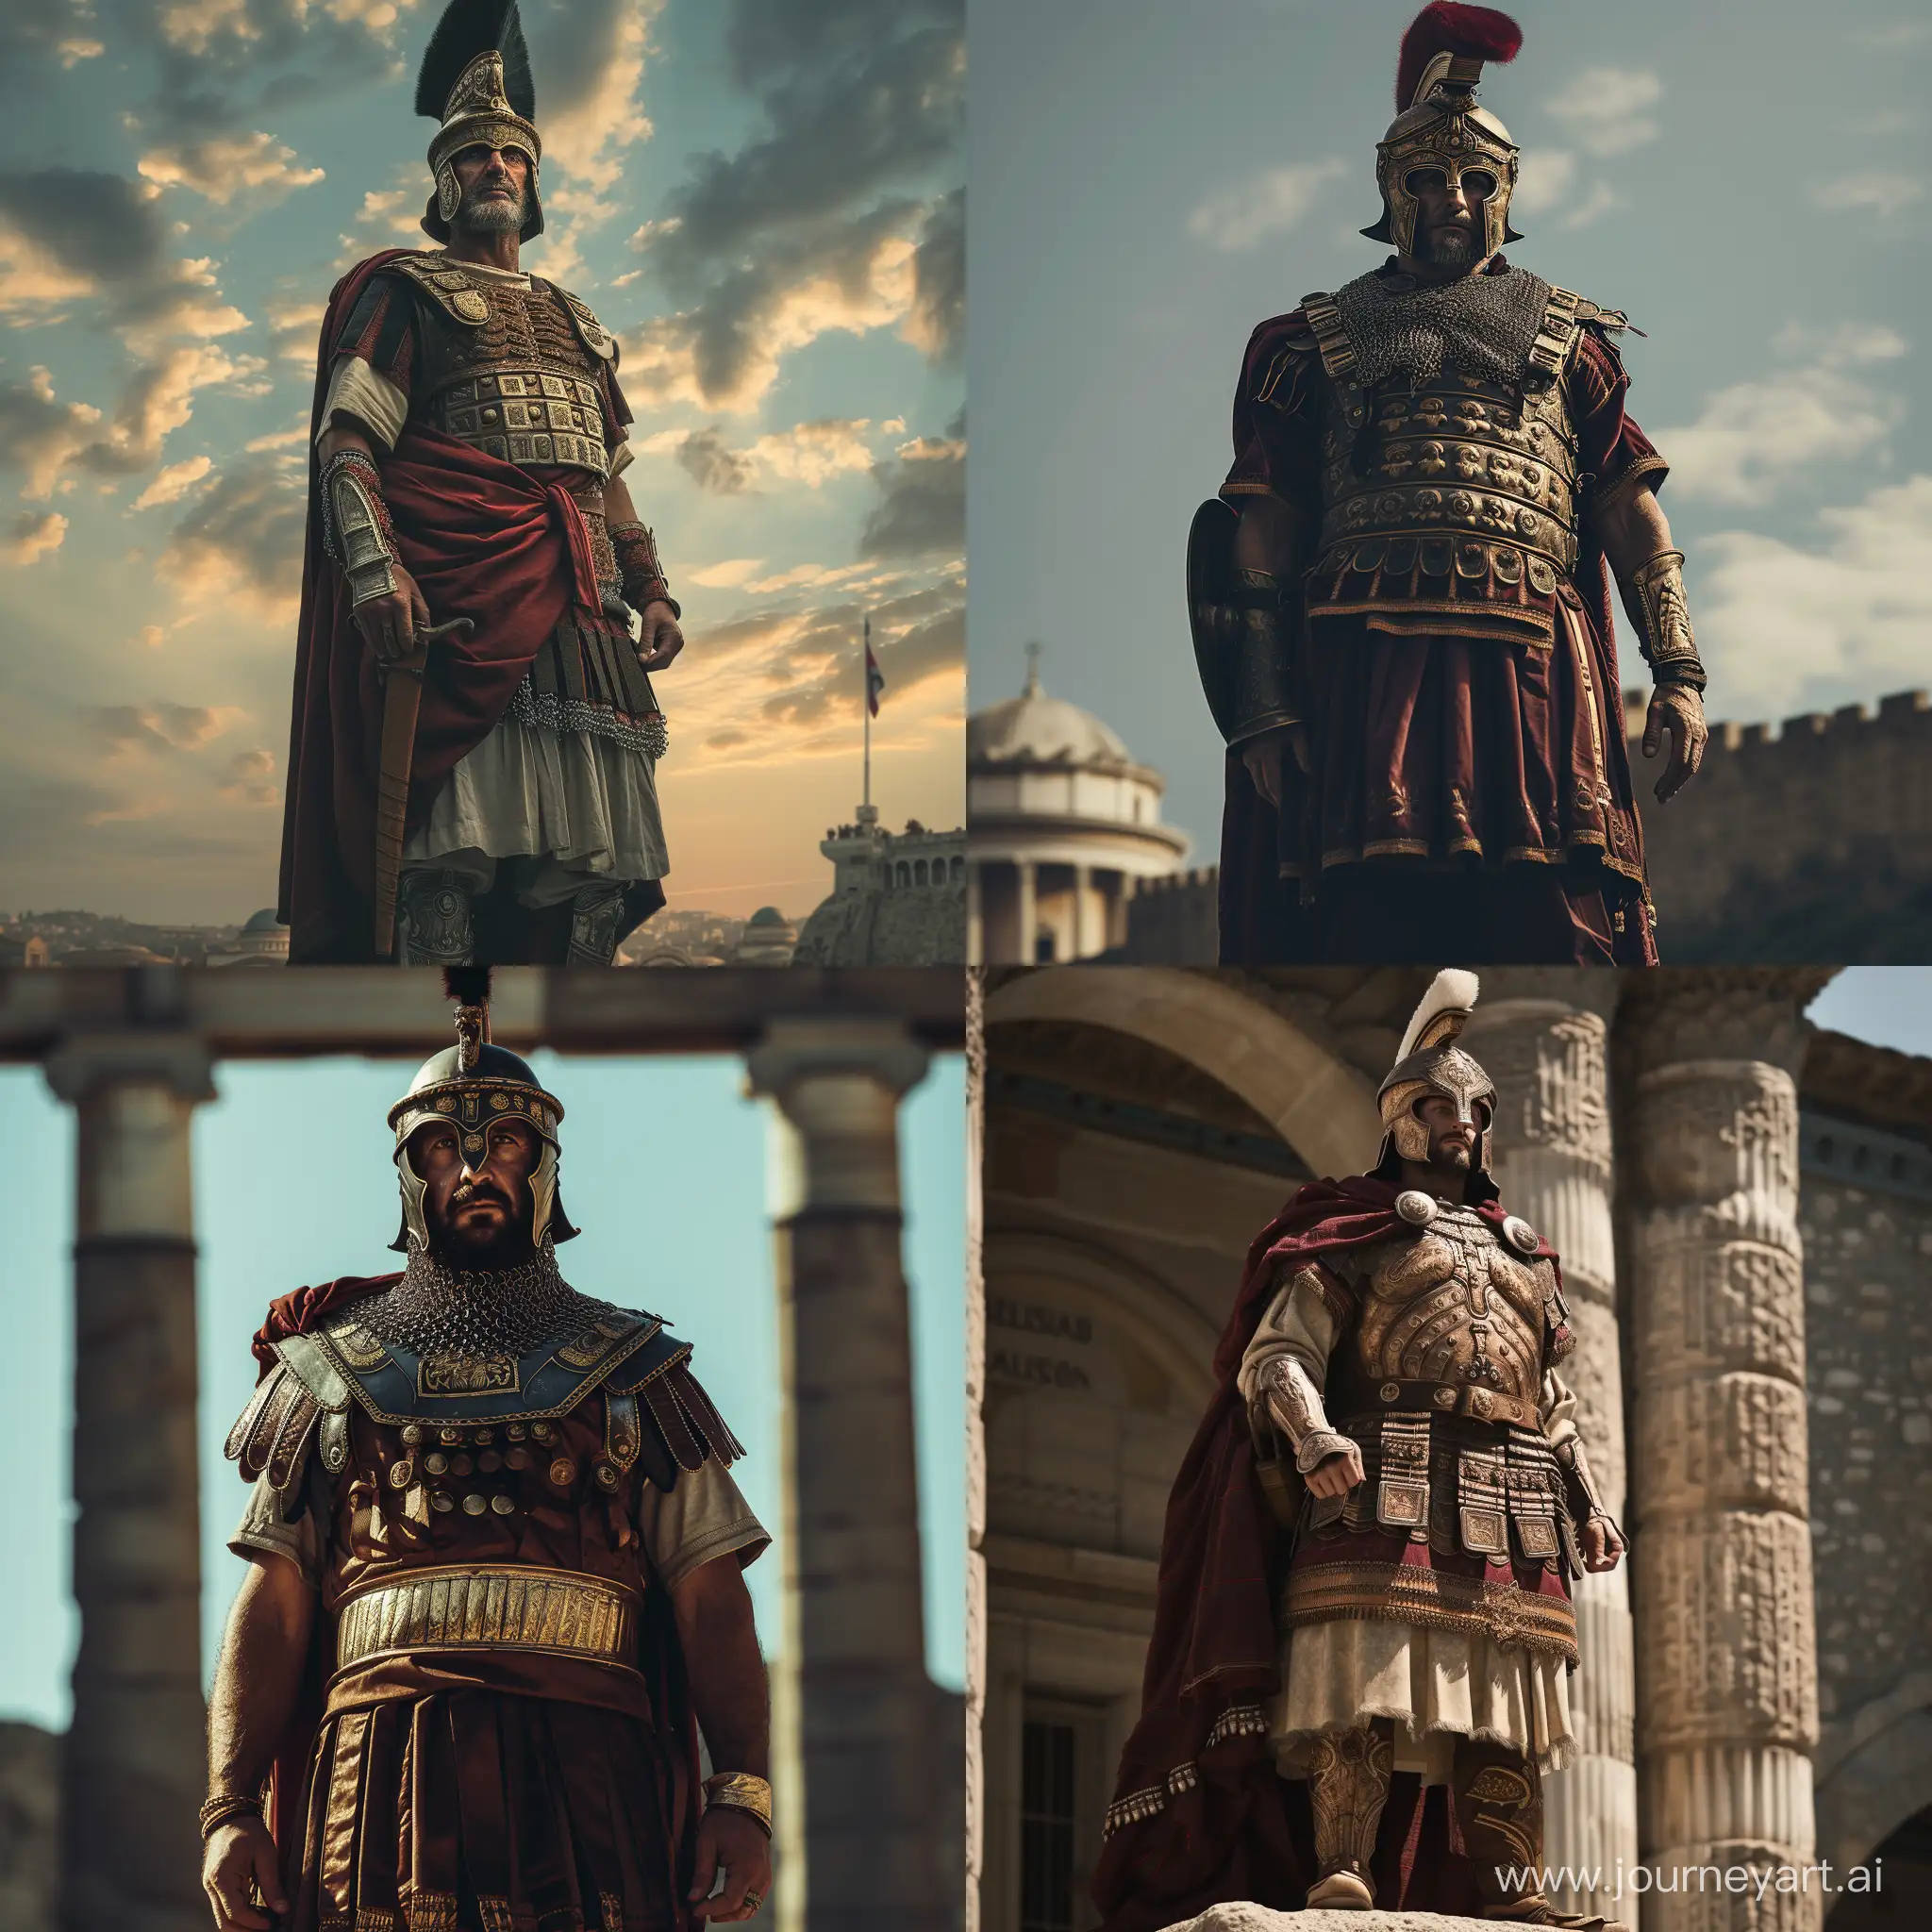 Proud-and-Brave-Byzantine-General-Belisarius-at-Constantinople